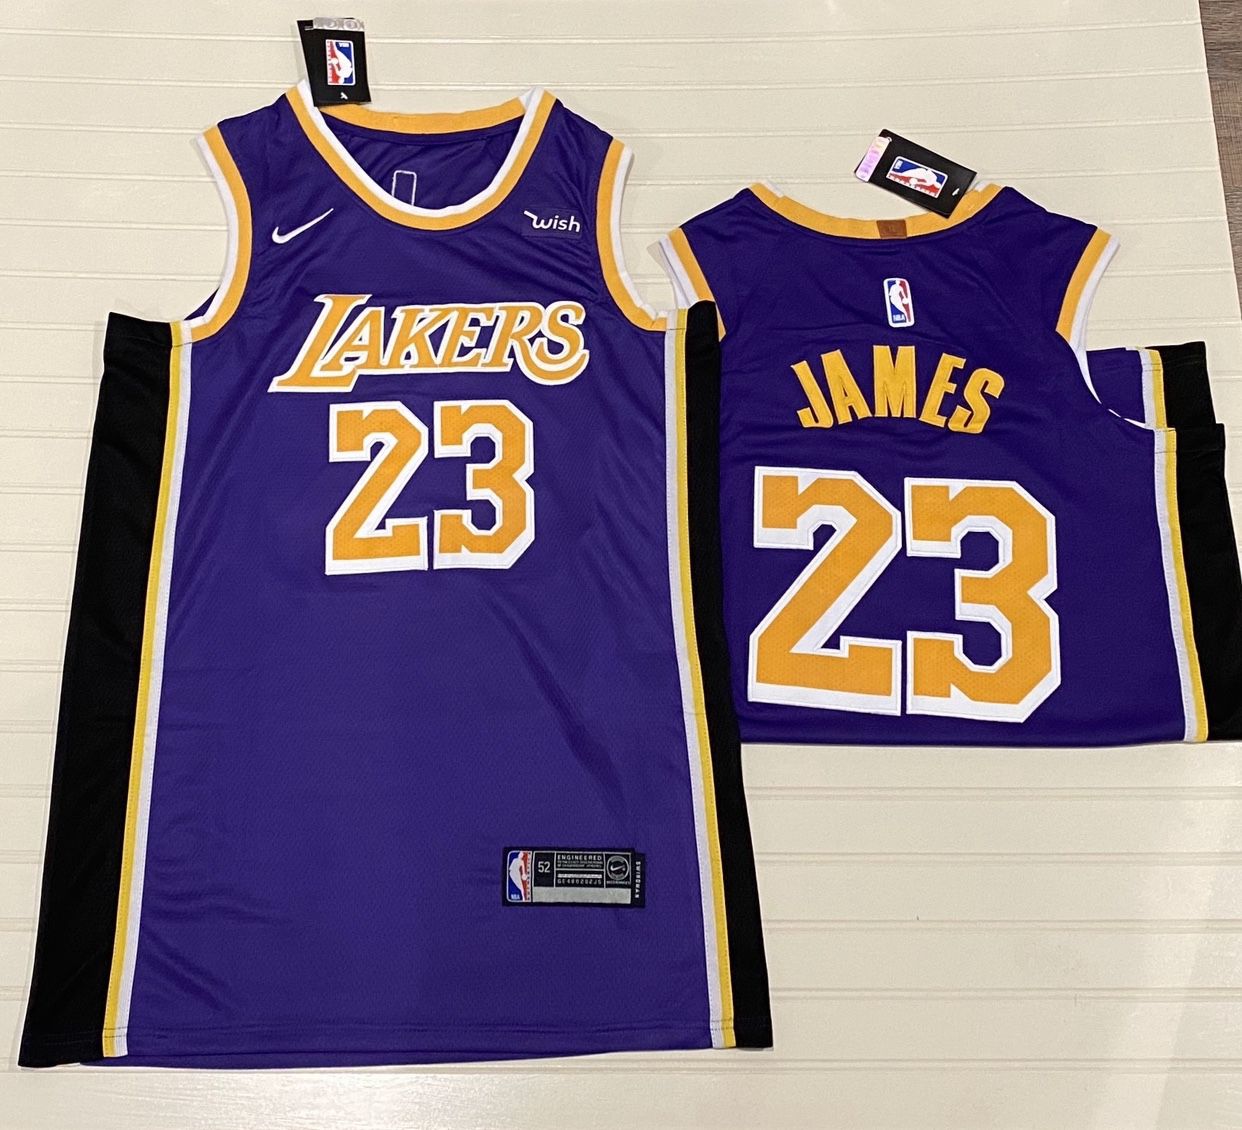 Lebron James Lakers Jerseys Size: XL and 2xl